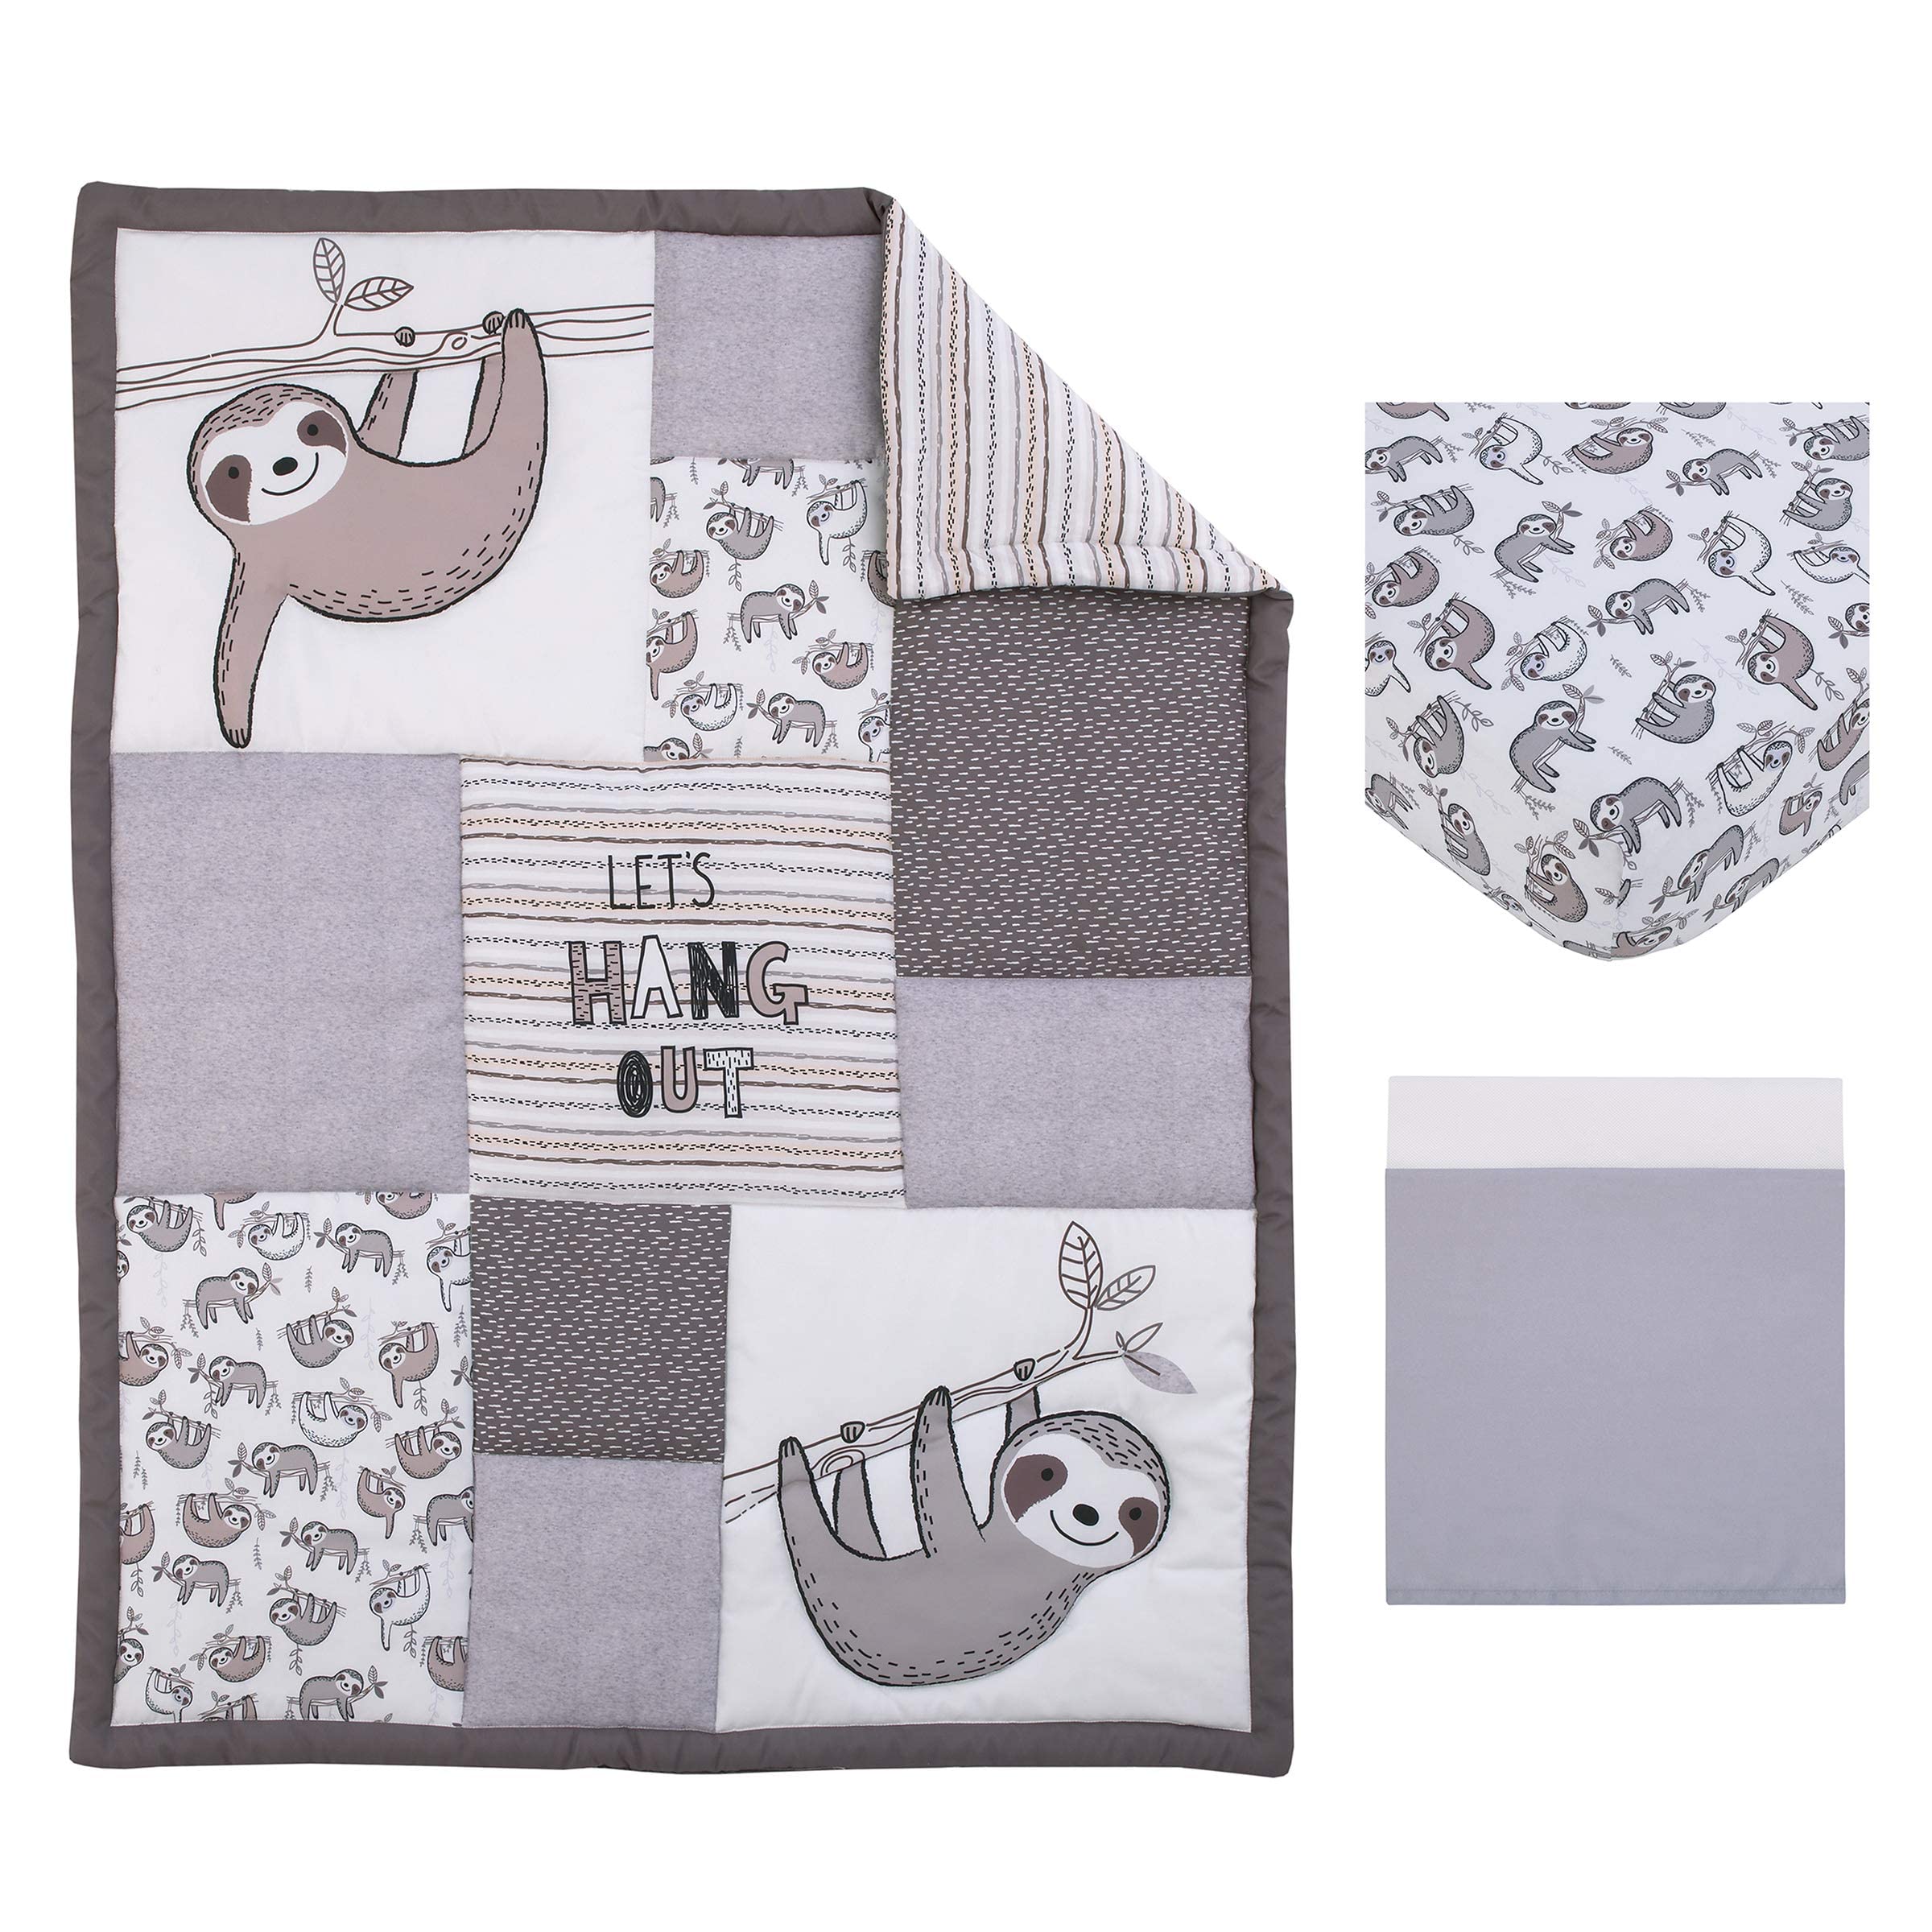 NoJo Little Love by NoJo Sloth Lets Hang Out grey, White and charcoal 3 Piece Nursery crib Bedding Set - comforter, crib Sheet, Dust